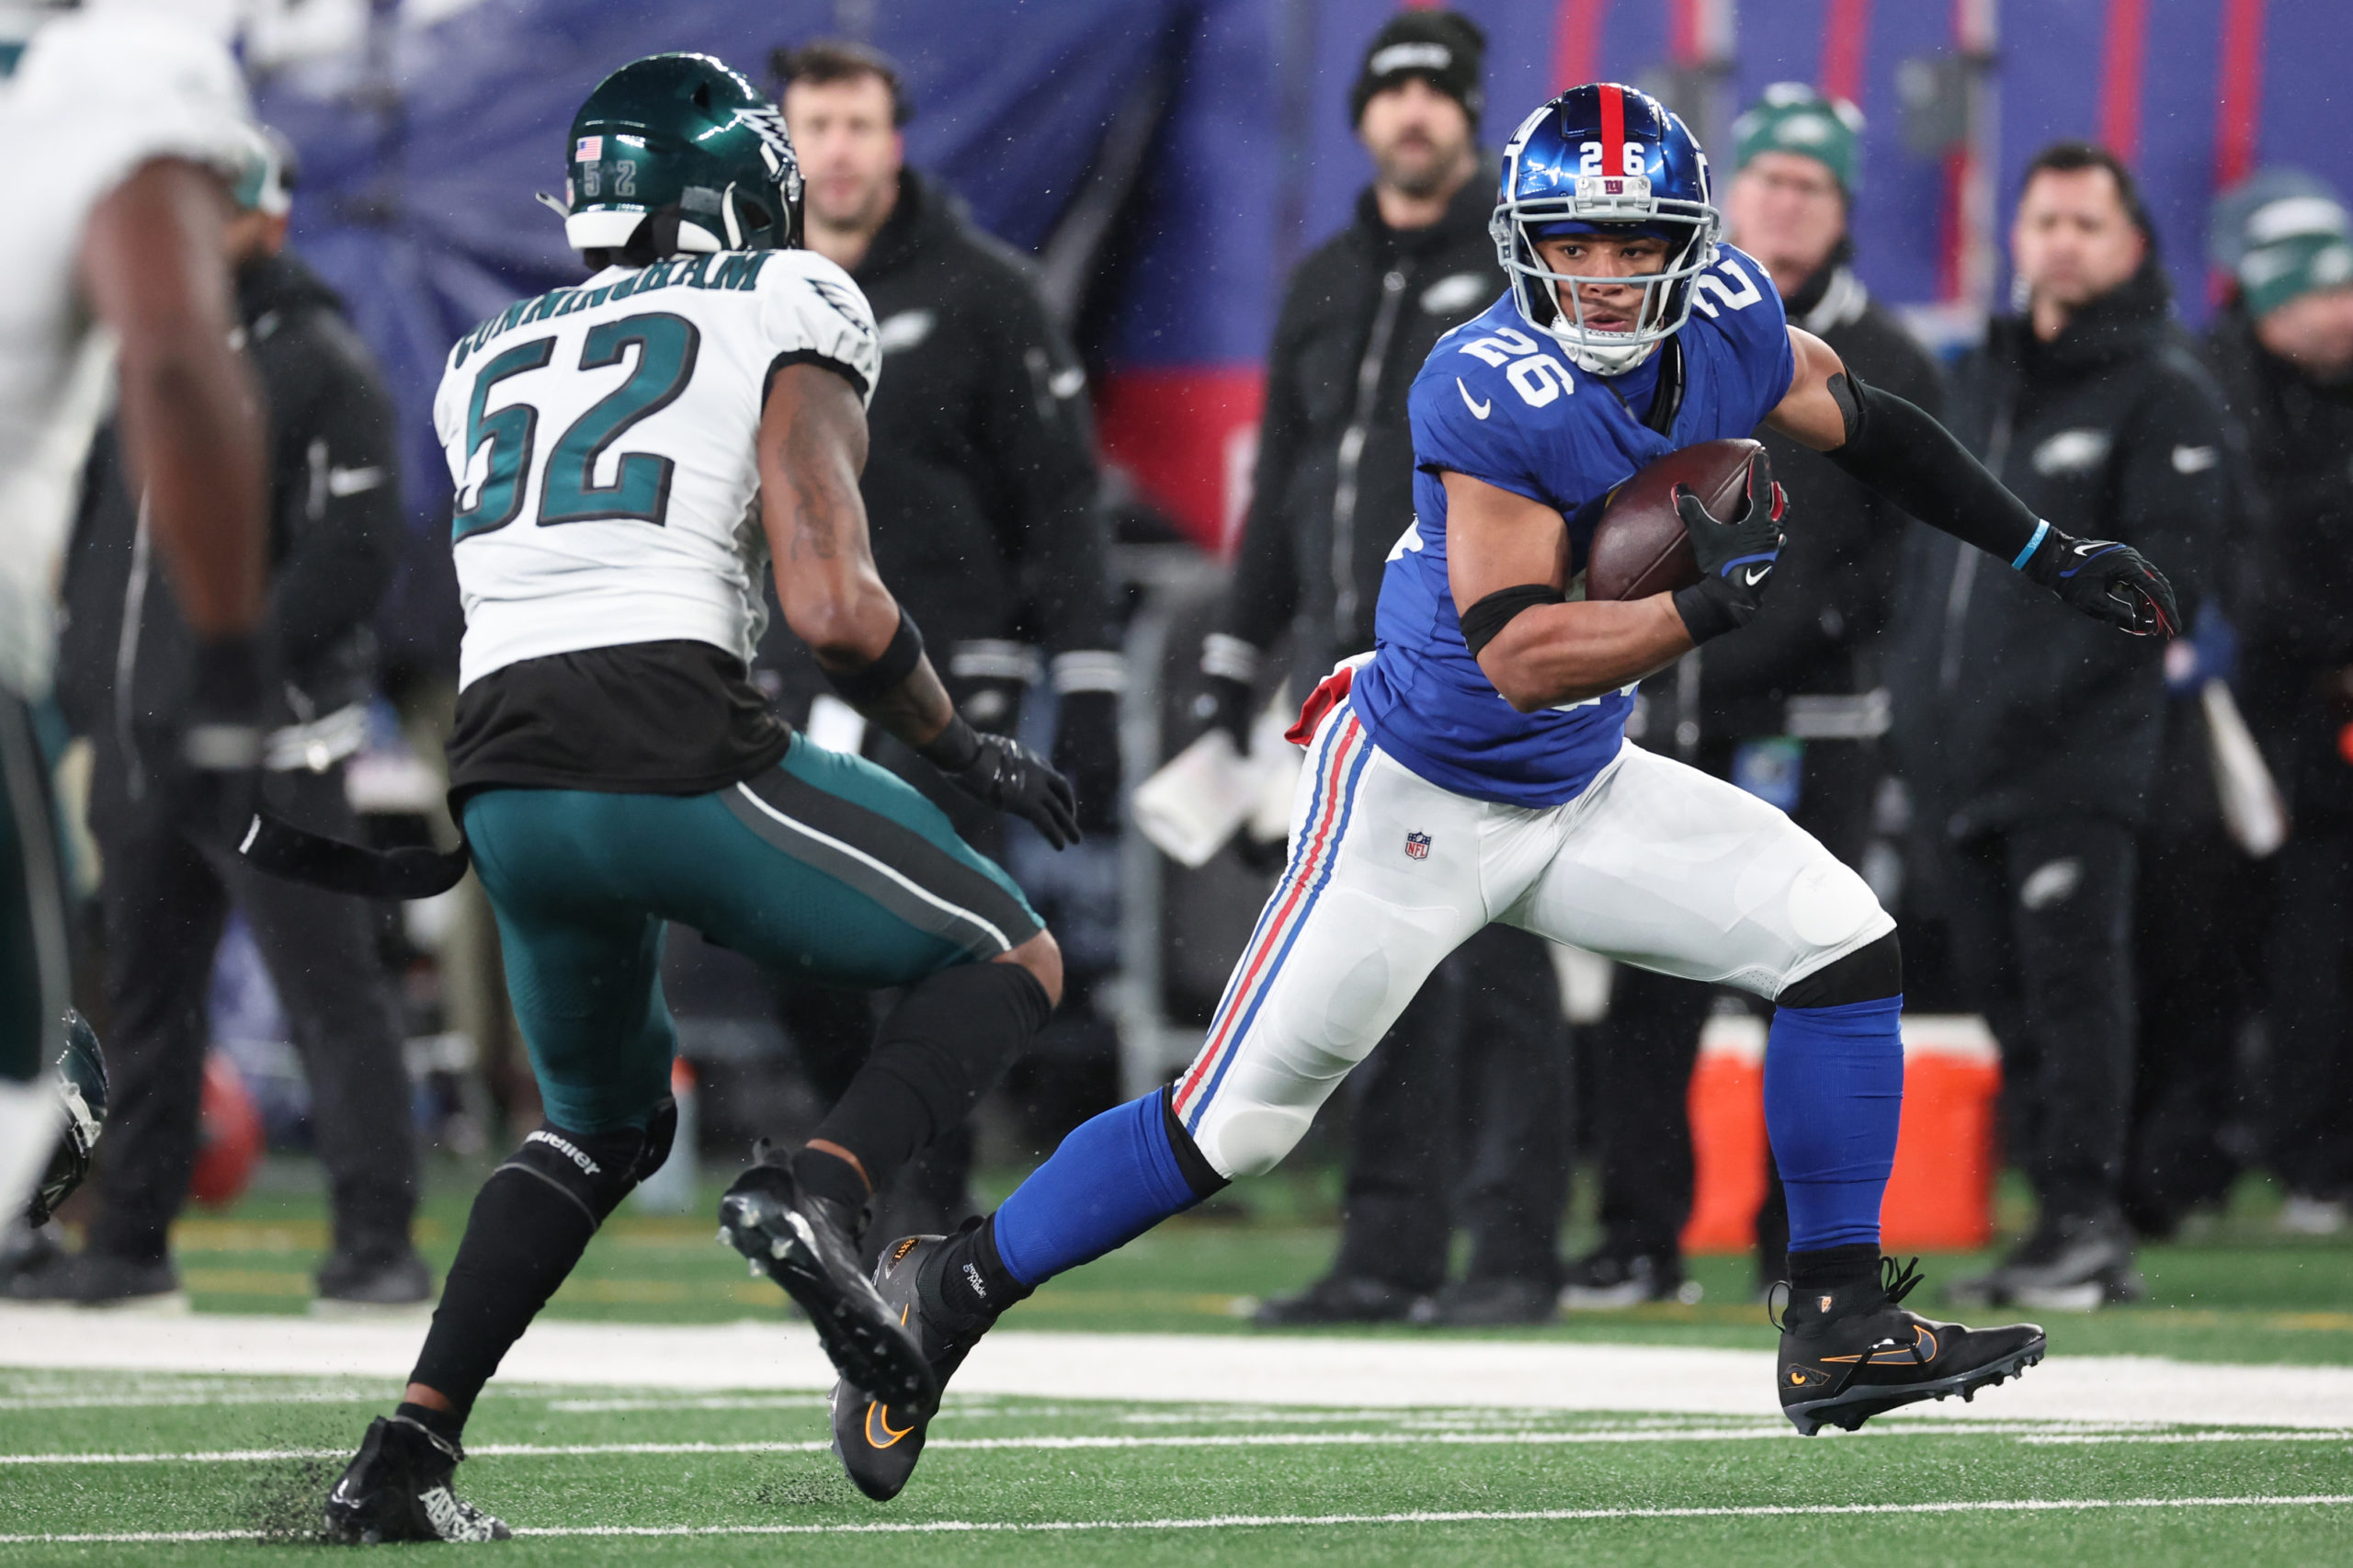 EAST RUTHERFORD, NEW JERSEY - JANUARY 07: Saquon Barkley #26 of the New York Giants runs the ball while defended by Zach Cunningham #52 of the Philadelphia Eagles during the first half at MetLife Stadium on January 07, 2024 in East Rutherford, New Jersey. Al Bello/Getty Images